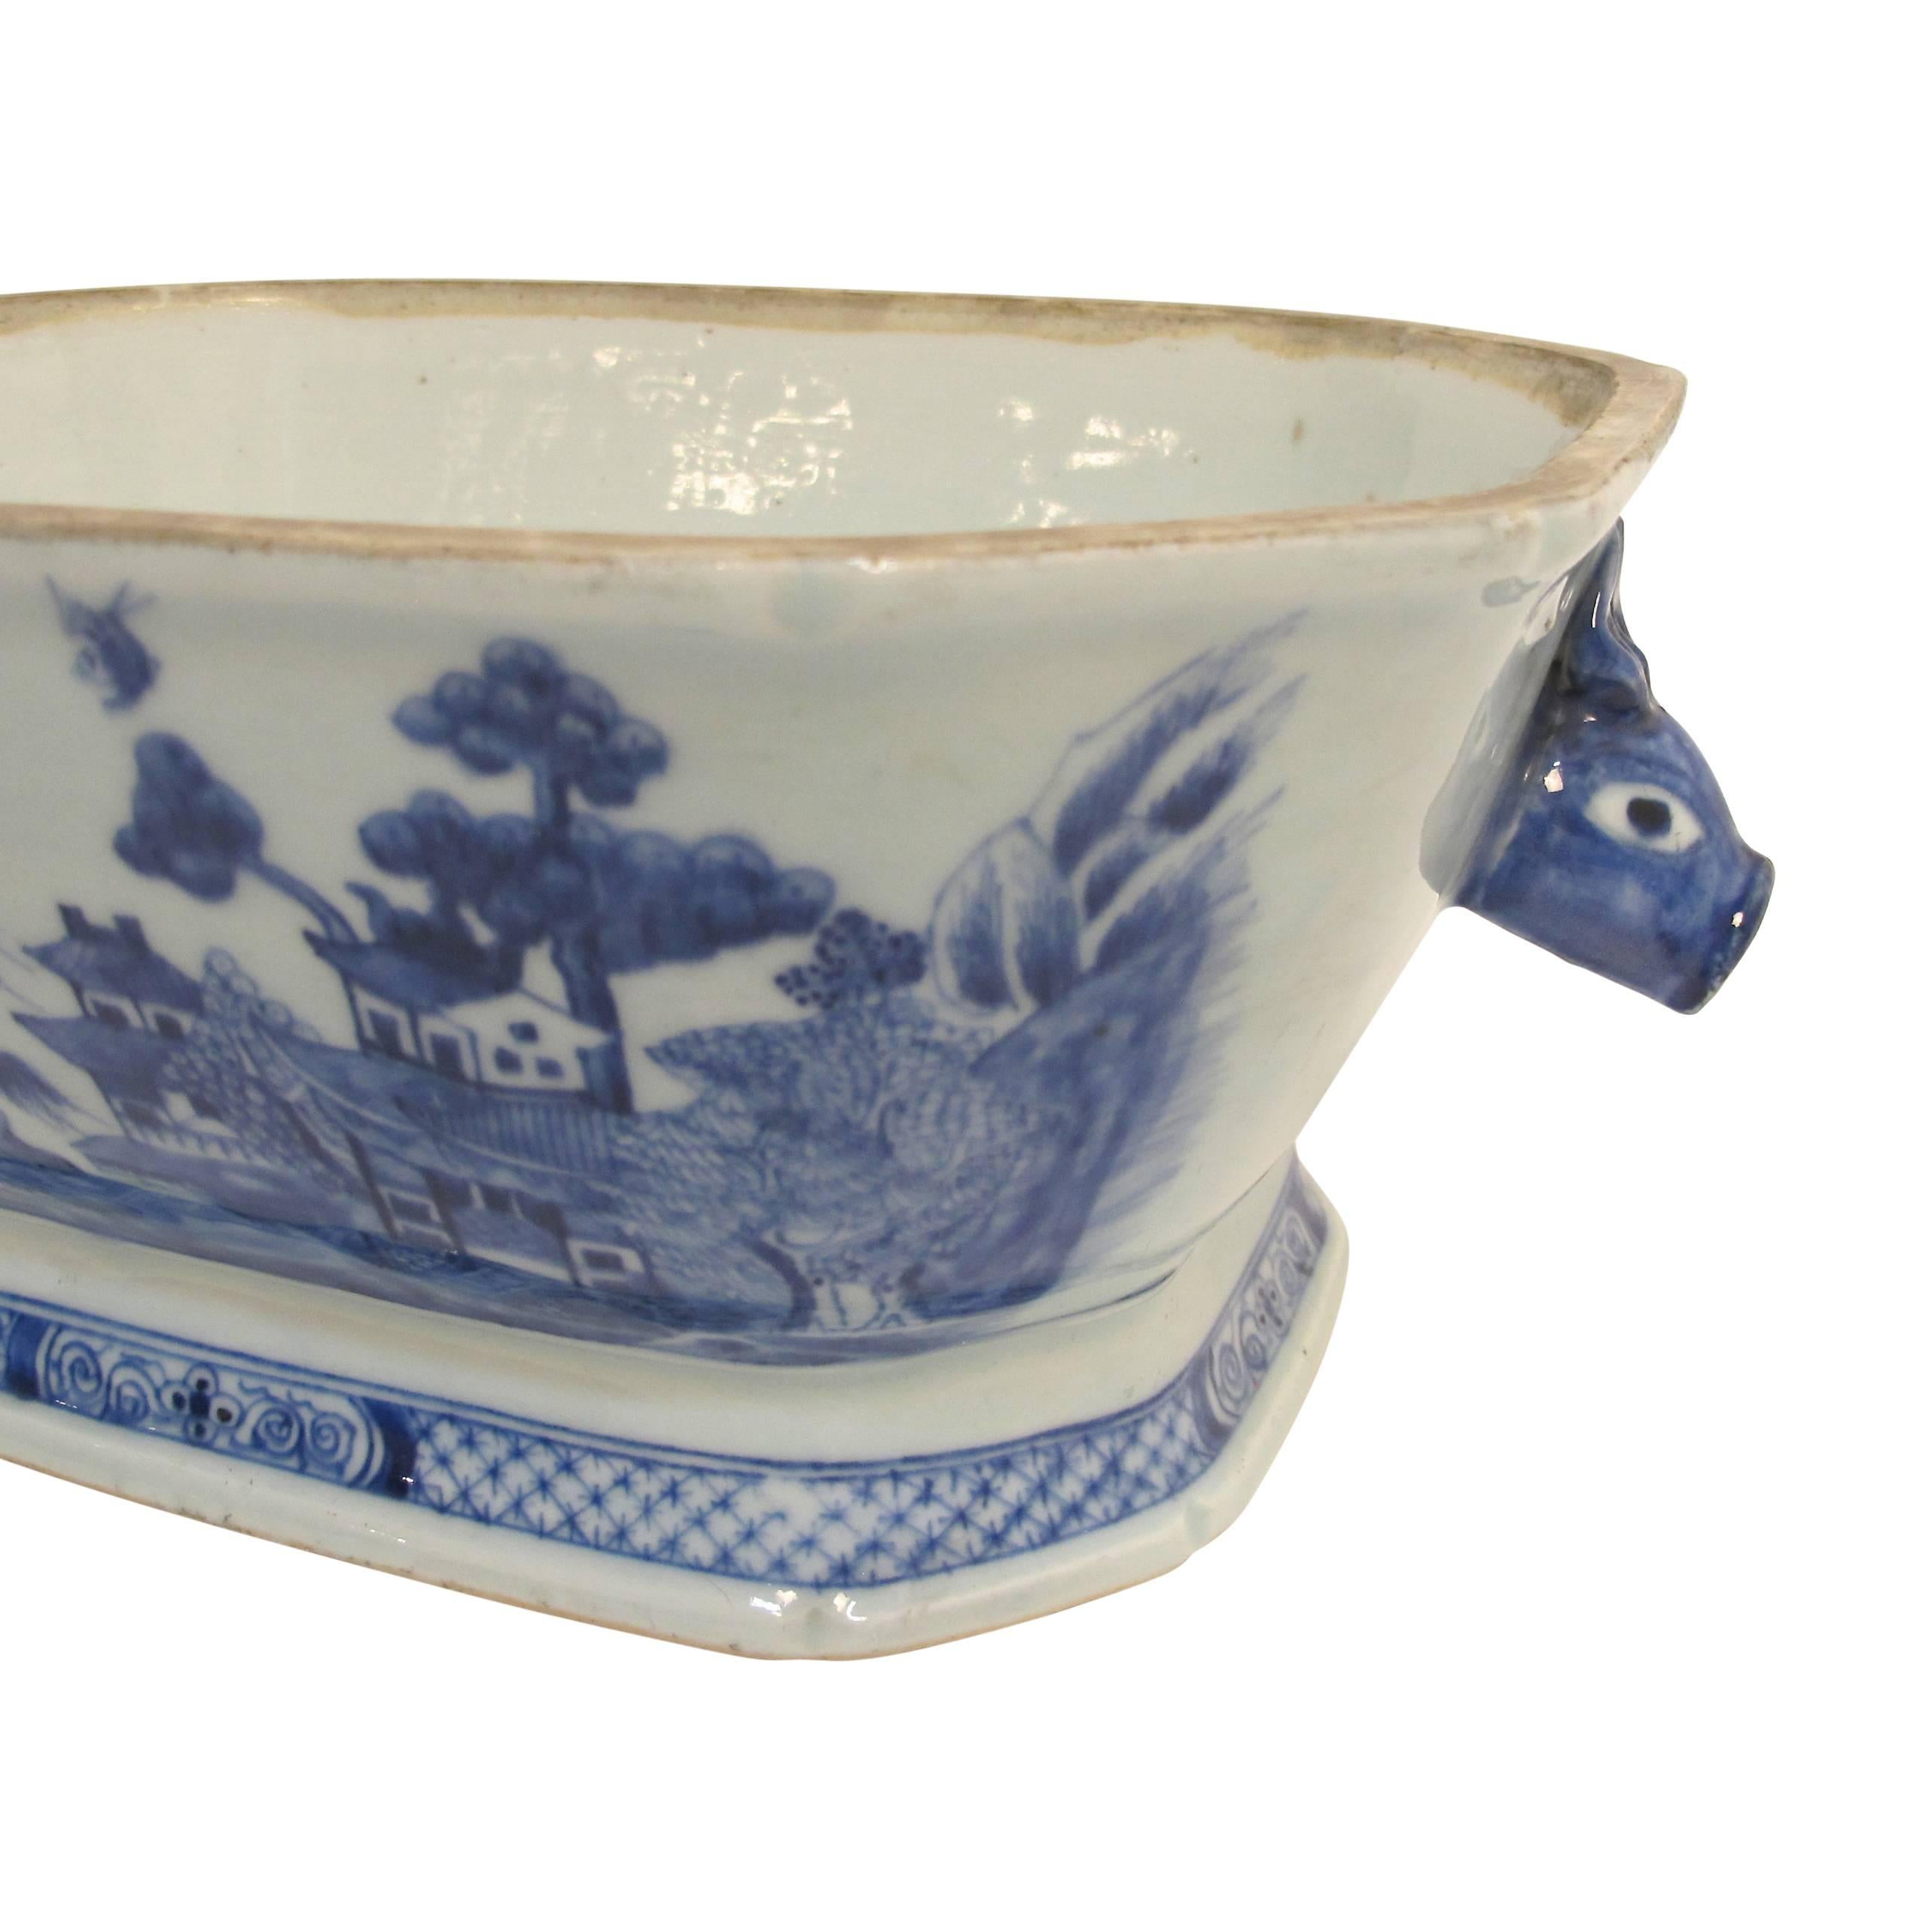 Hand-Painted Blue and White Nanking Ware Tureen, Chinese Export 19th Century